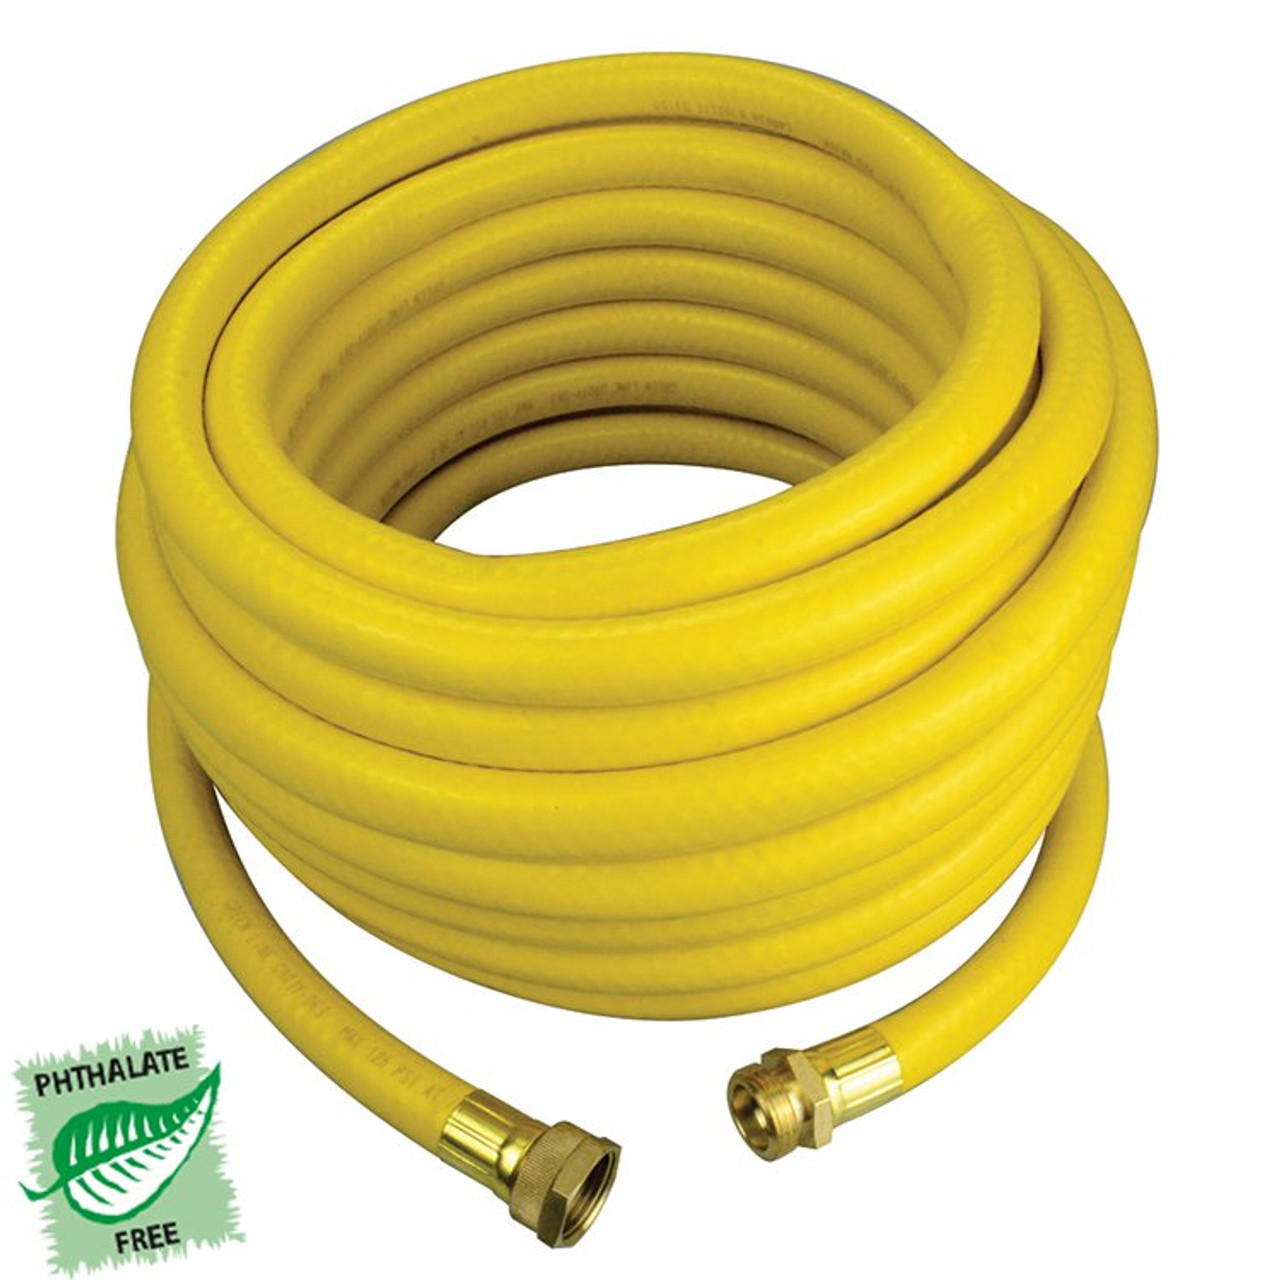 5/8" x 25' Pro Water Hose Assembly   G901Y-063GHT25